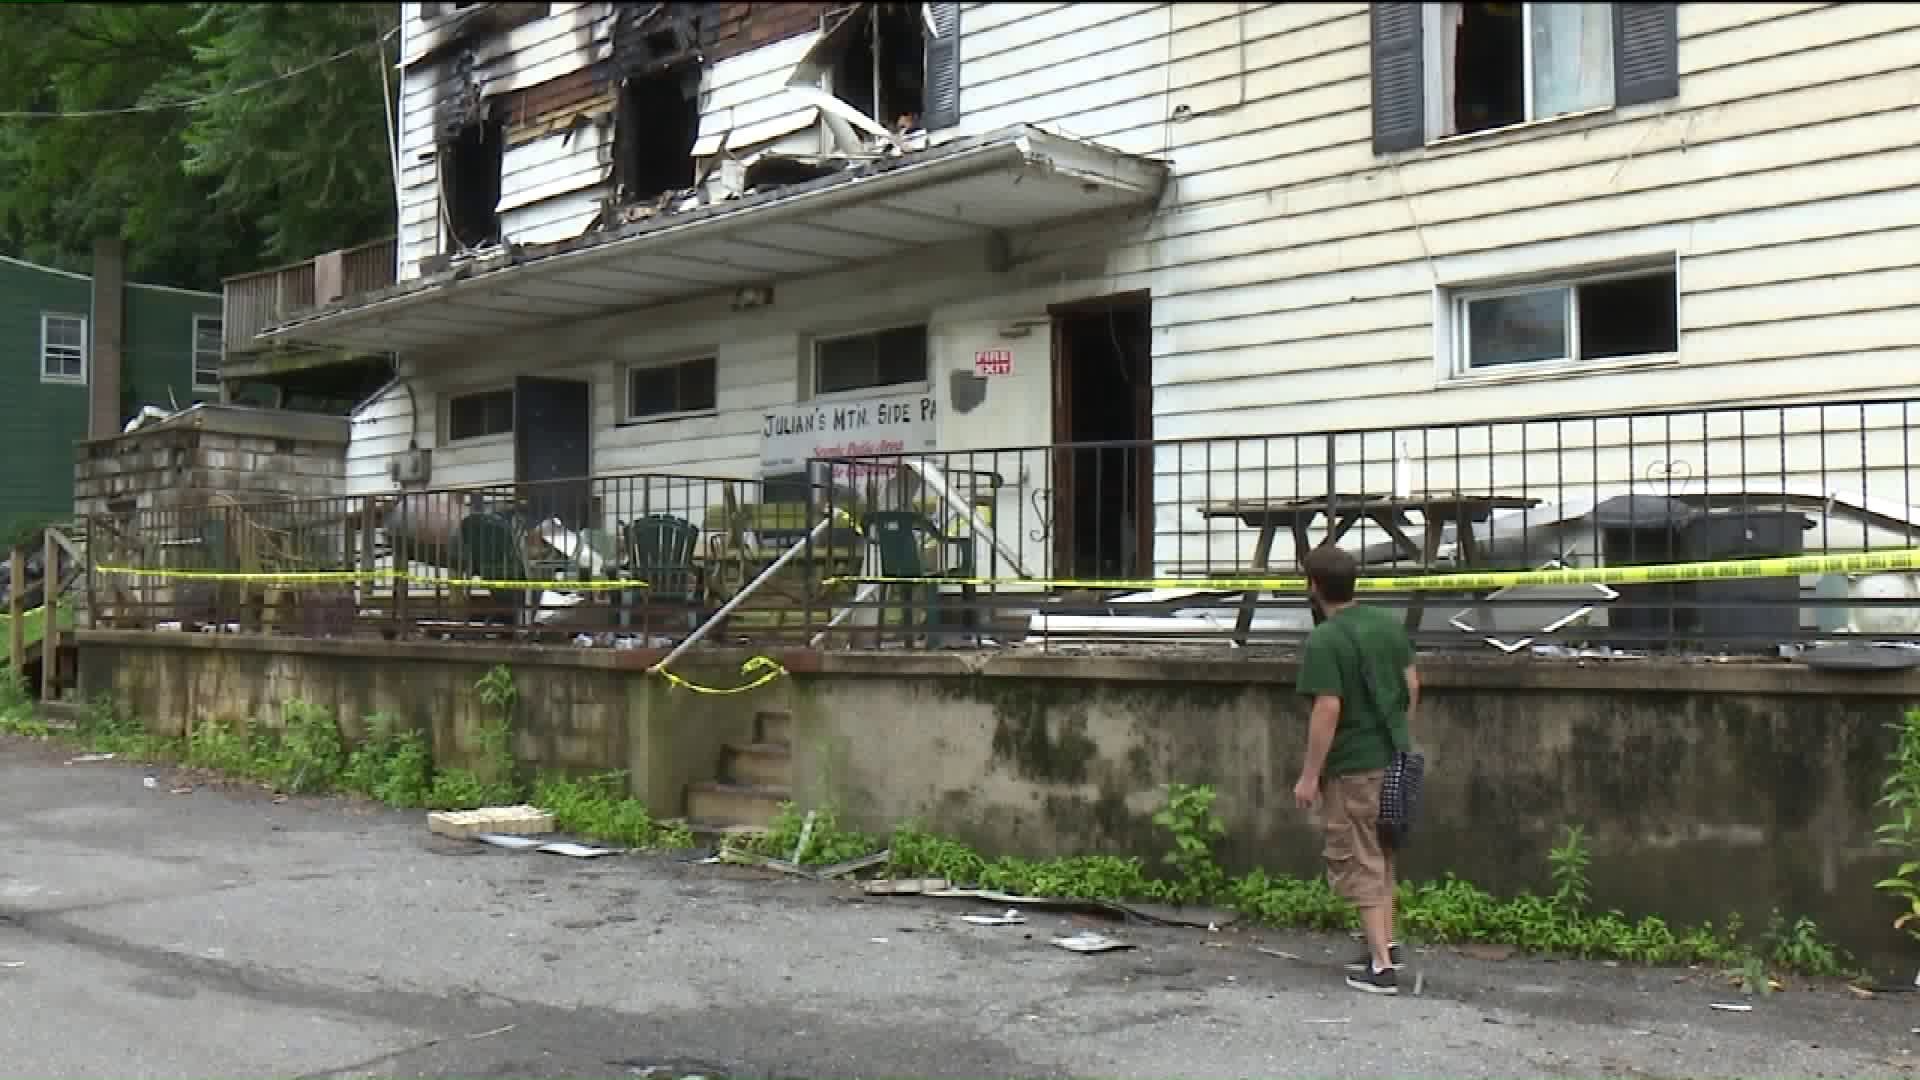 Residents Reflect In Aftermath Of Fire At Former Bar